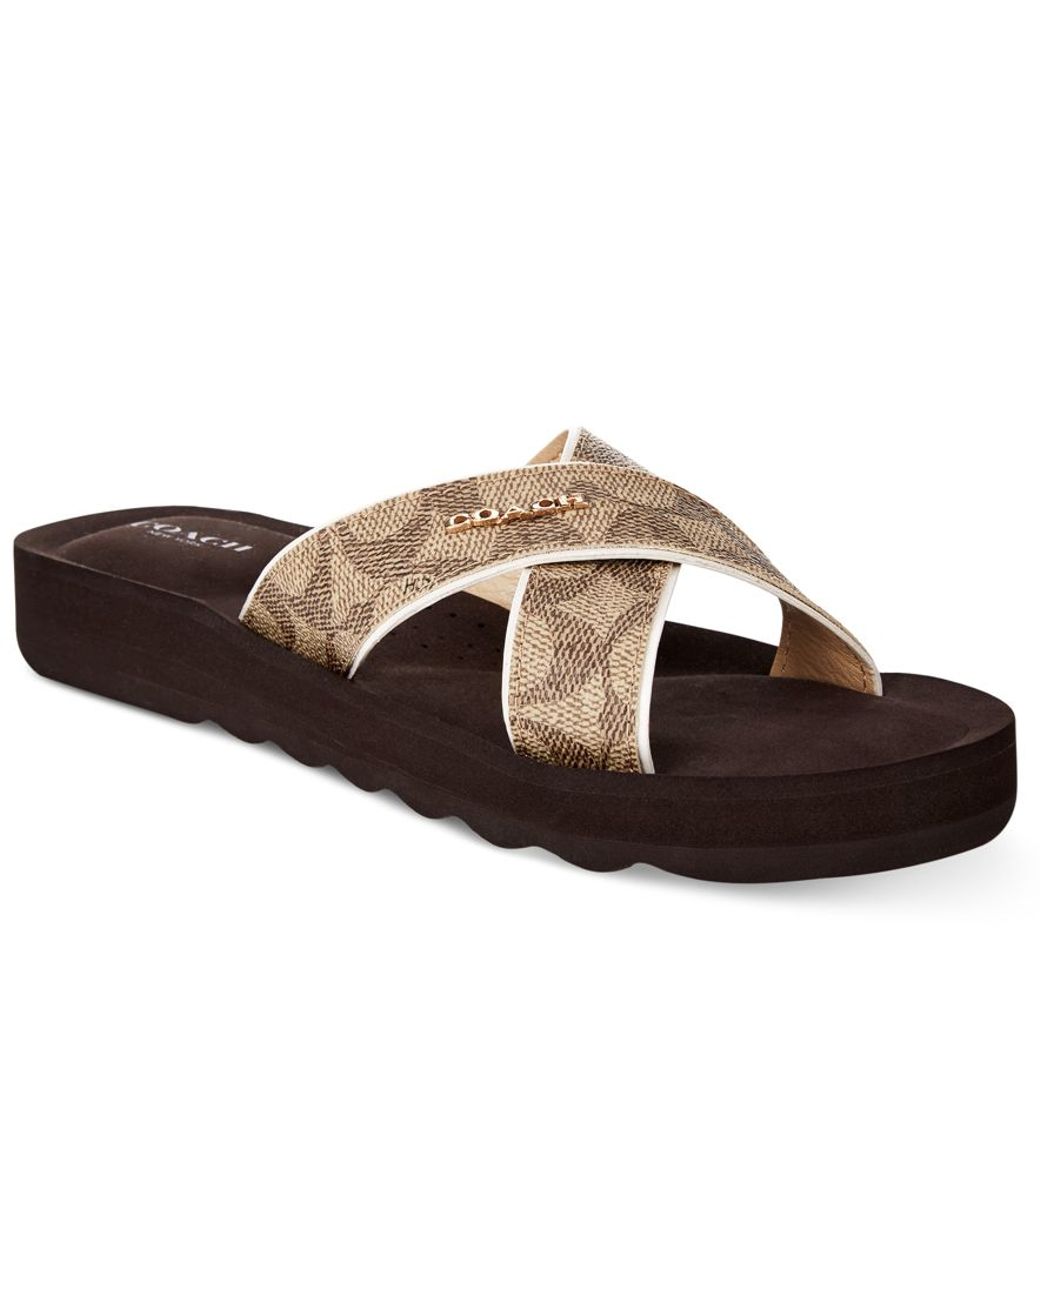 COACH Janine Strappy Slide Sandals in Brown | Lyst